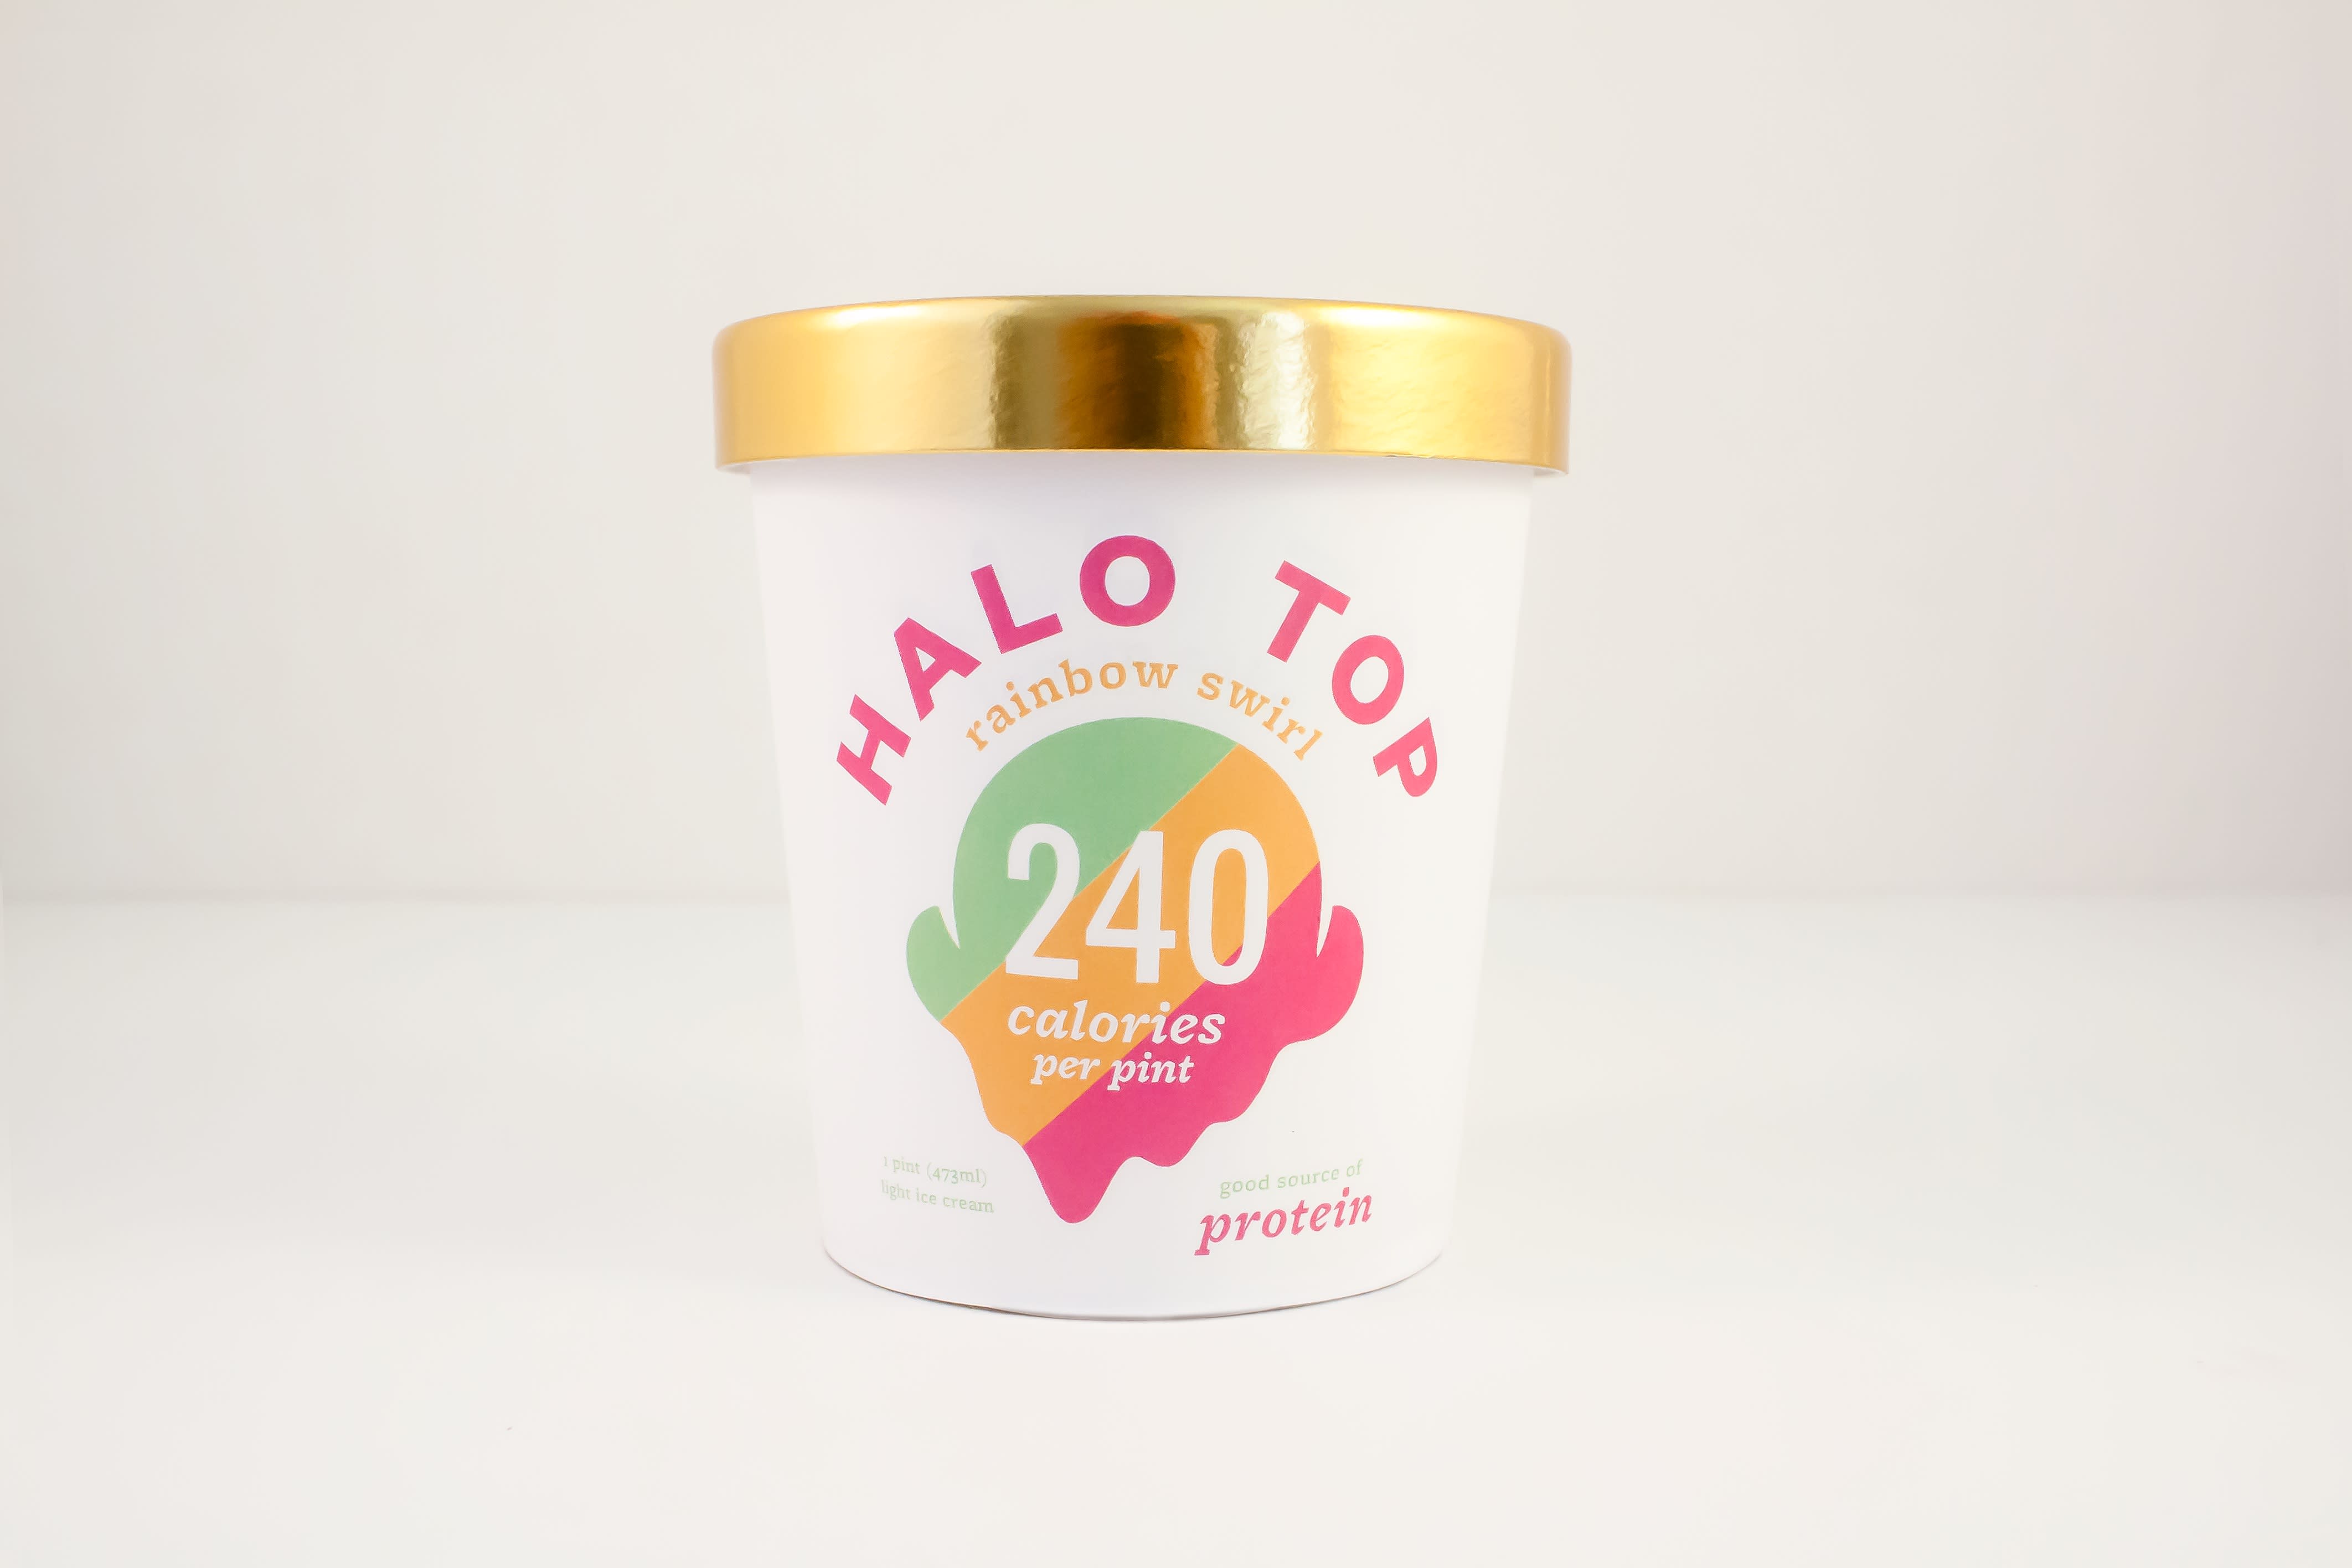 Halo Top Ice Cream Just Announced 7 New Flavors | Kitchn